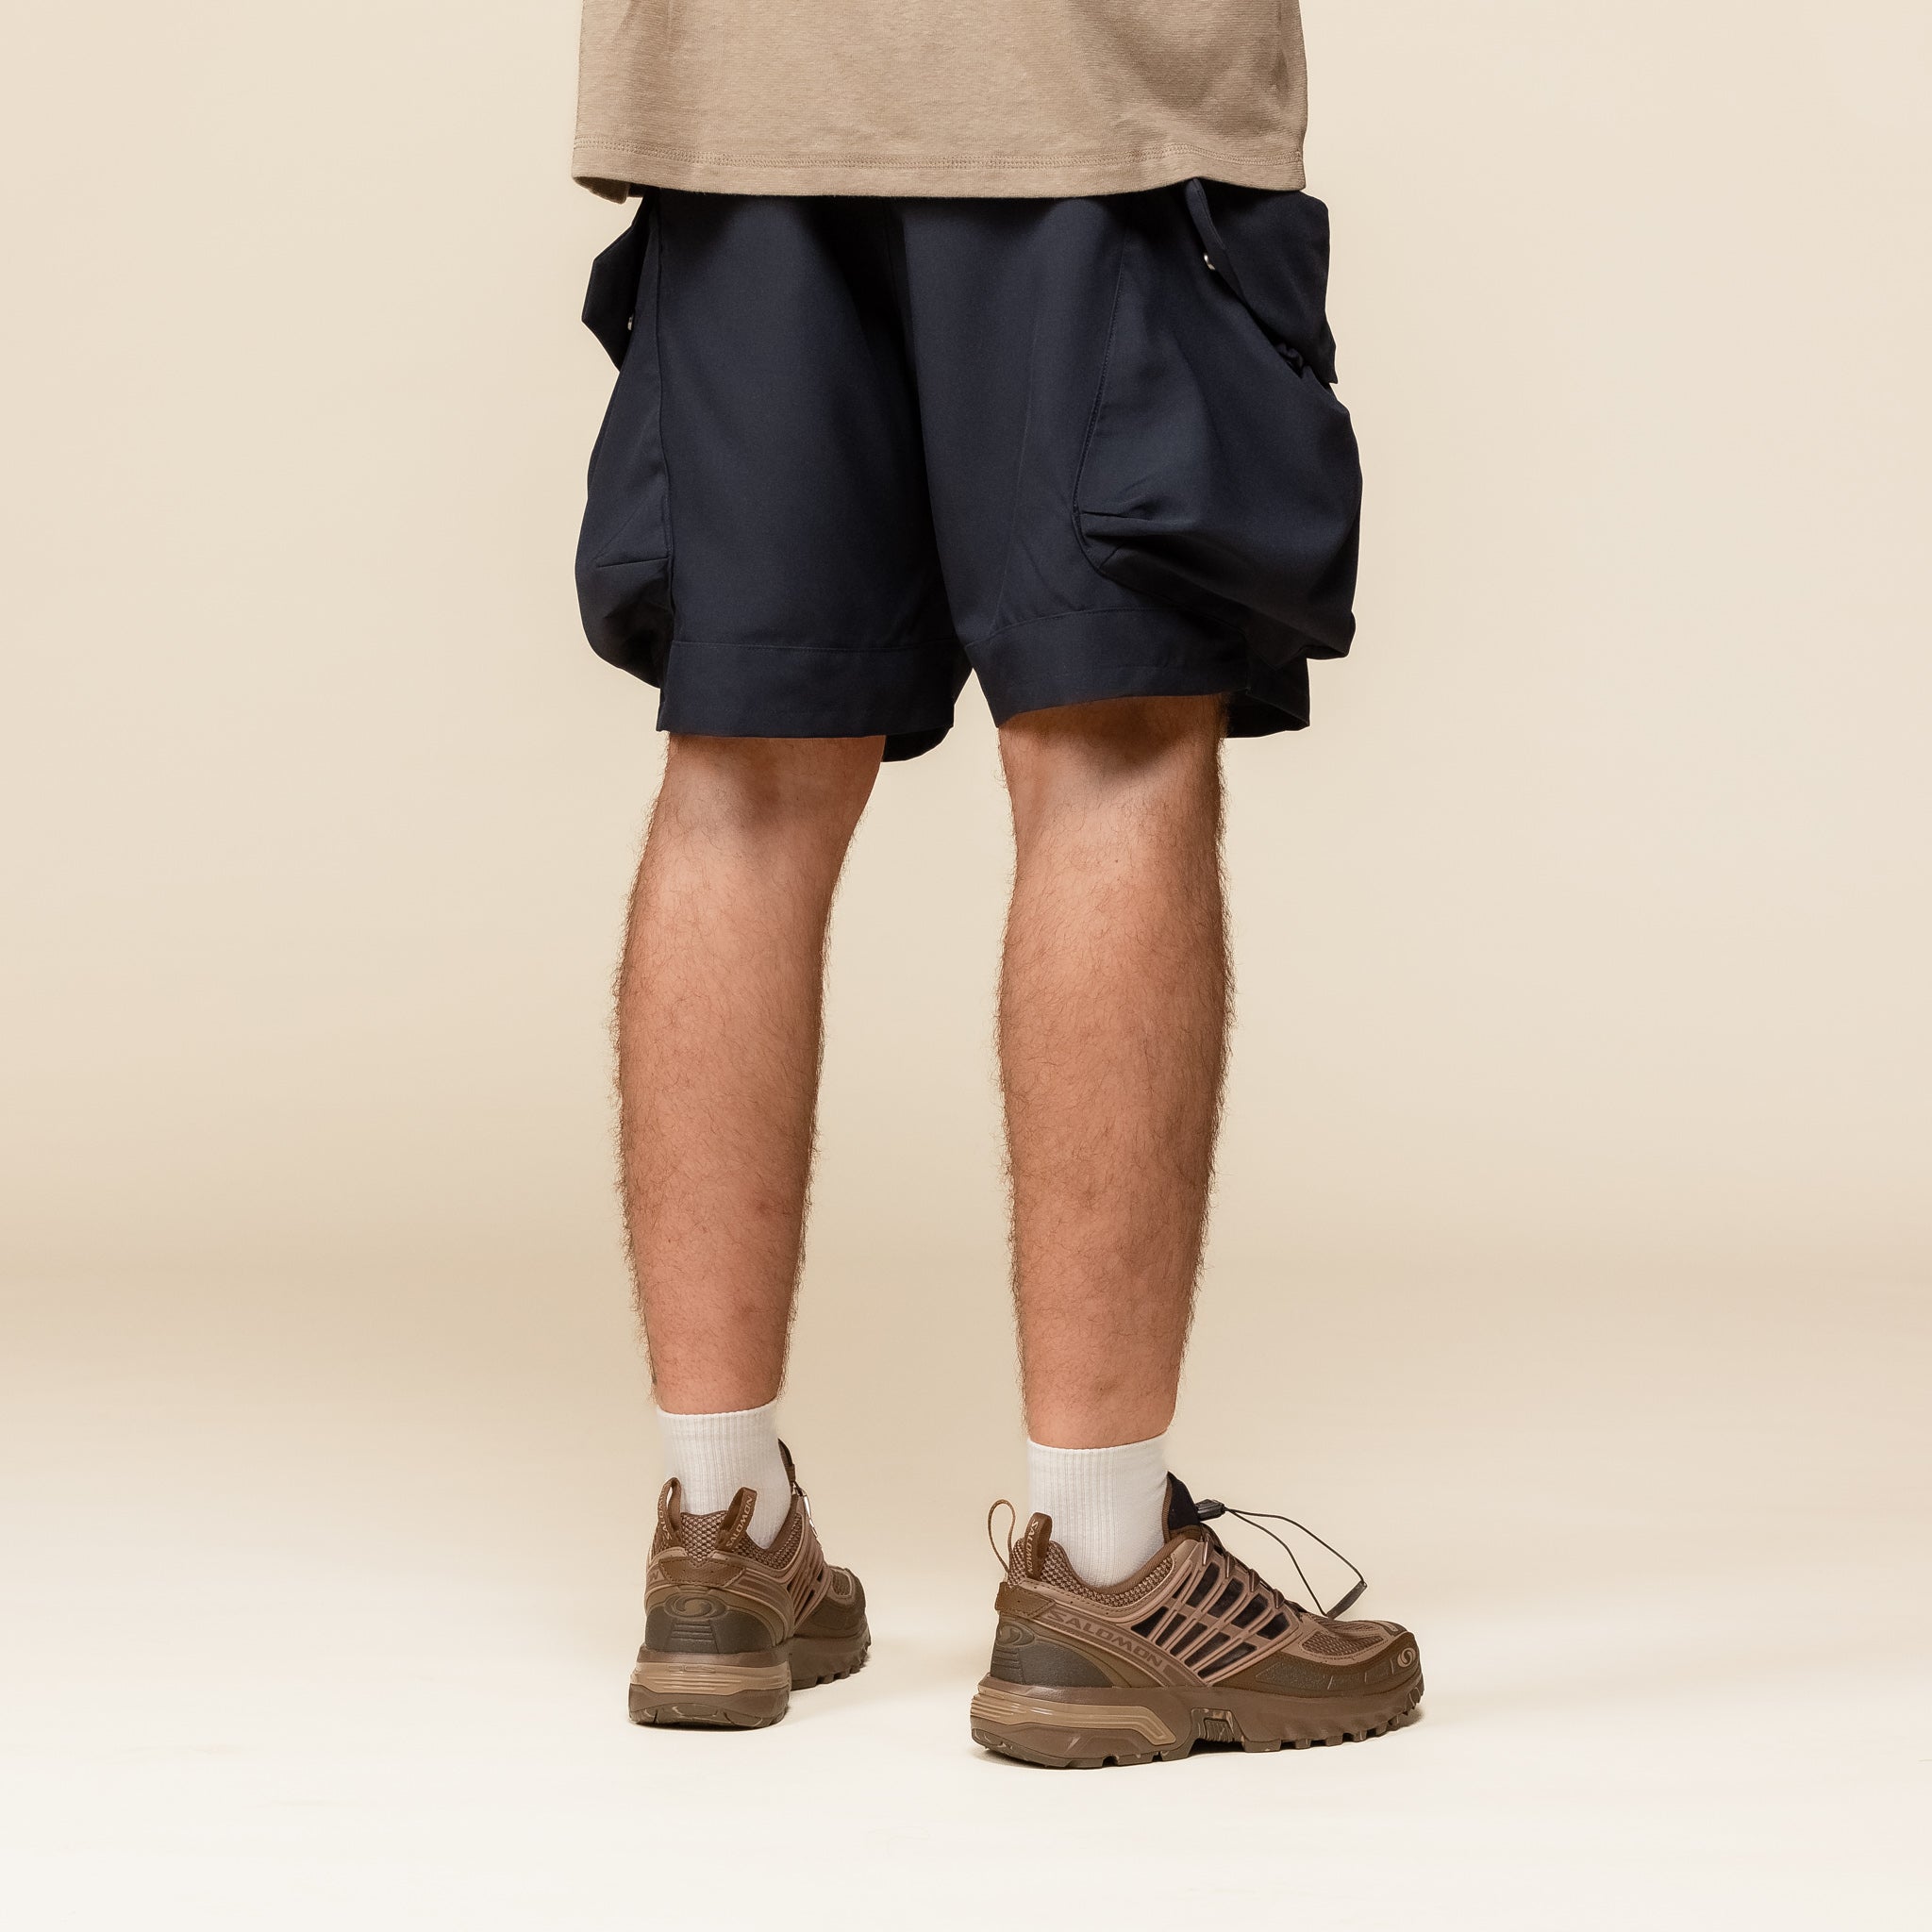 MW-PT24109 Meanswhile - Luggage Cargo Shorts - Navy Blue